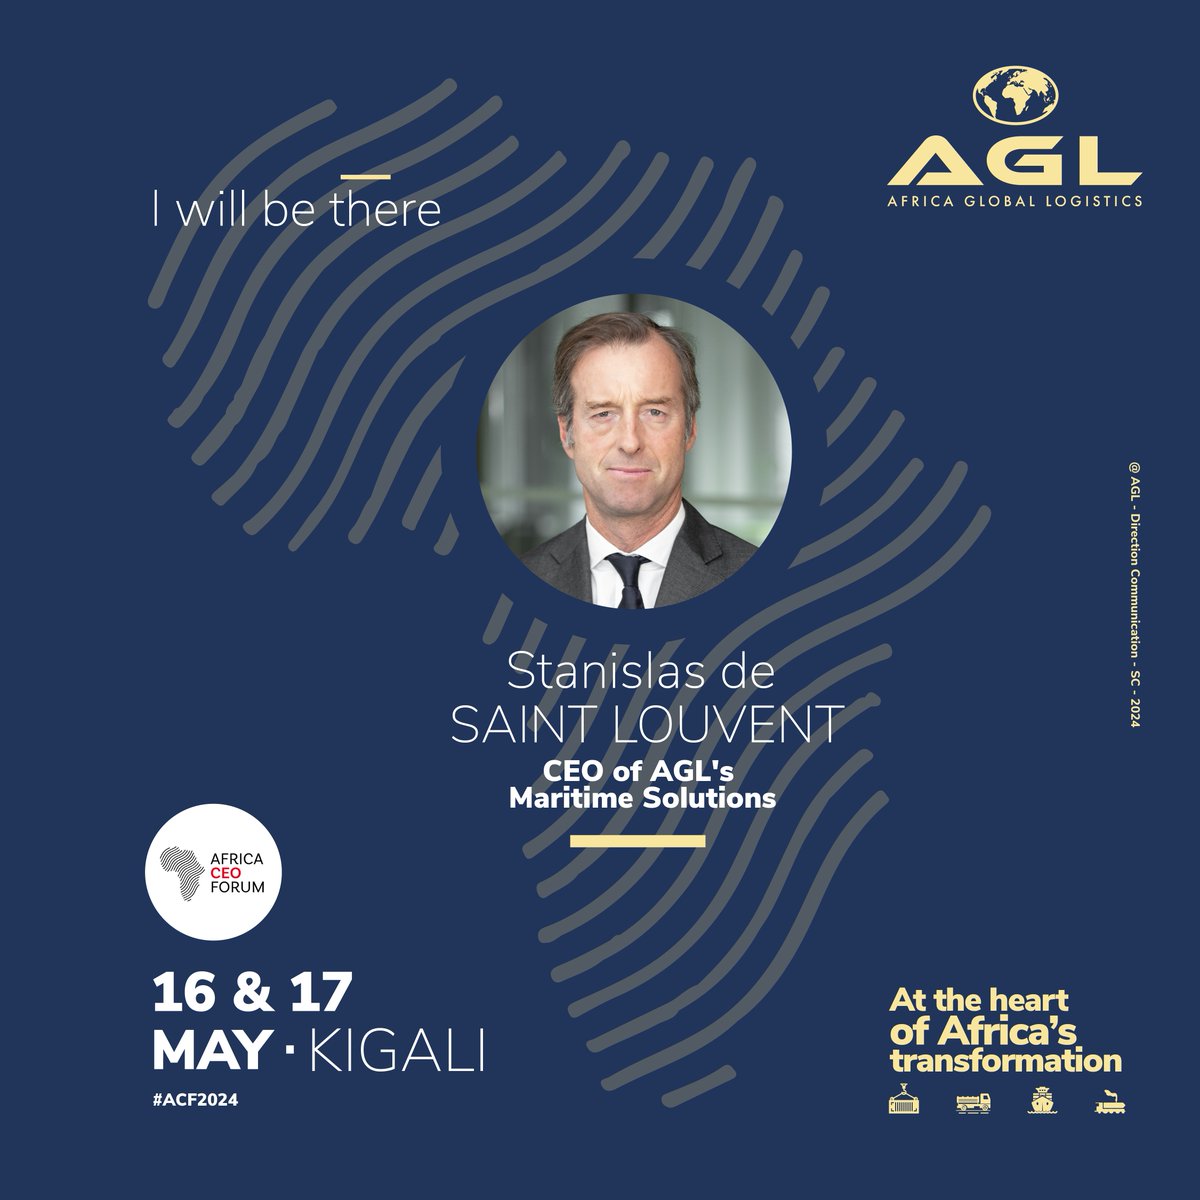 🎙️ Stanistlas de Saint Louvent, CEO of AGL's Maritime Solutions will take part to the @africaceoforum. He will share insights on accelerating the digitalization of African ports and AGL's - @aglgroup_ efforts in this area. 💎 #AGL, Diamond Partner of #ACF2024